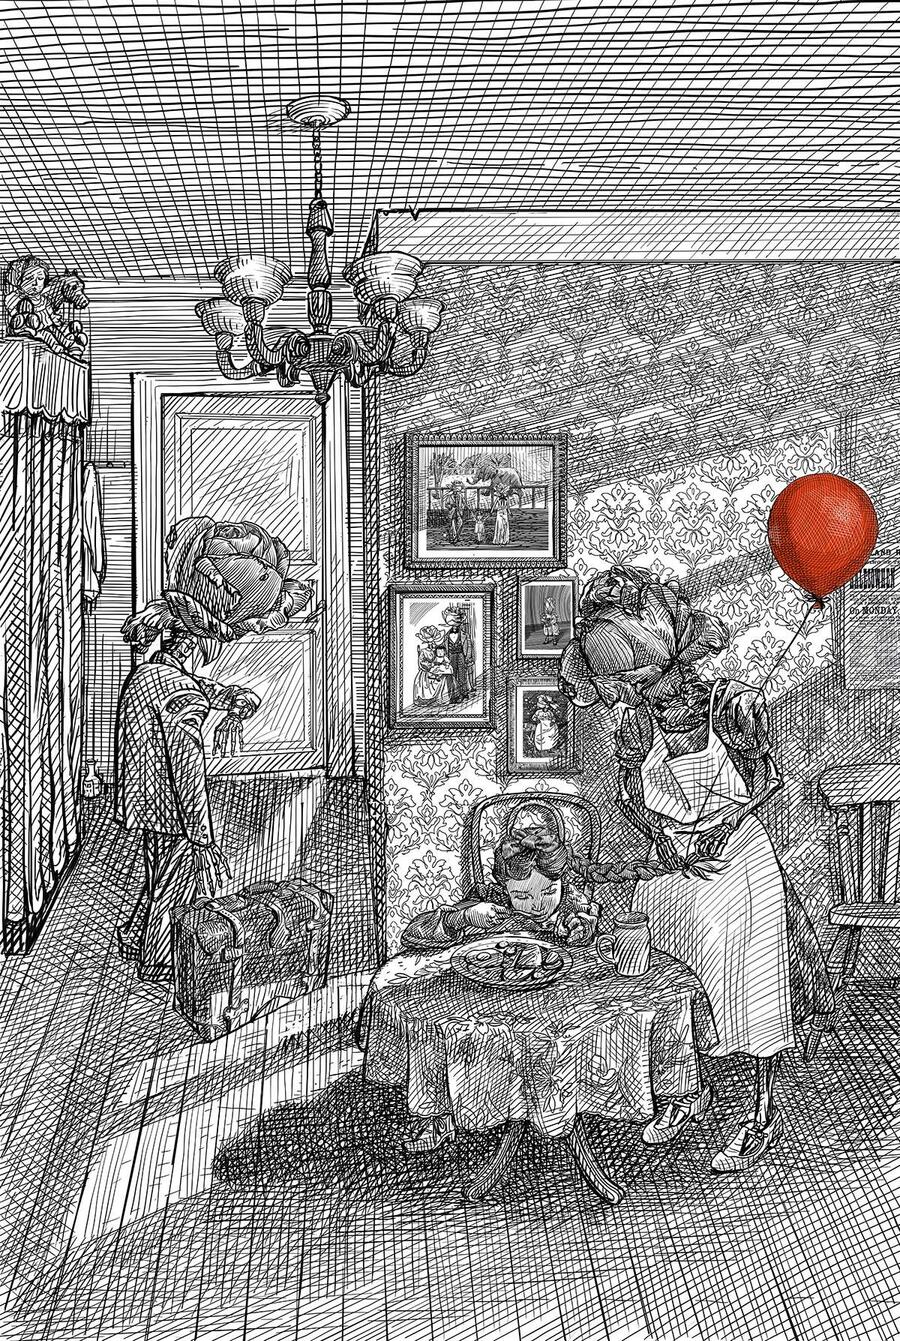 00-kuang_chu_red_balloon_withering_flowers_15